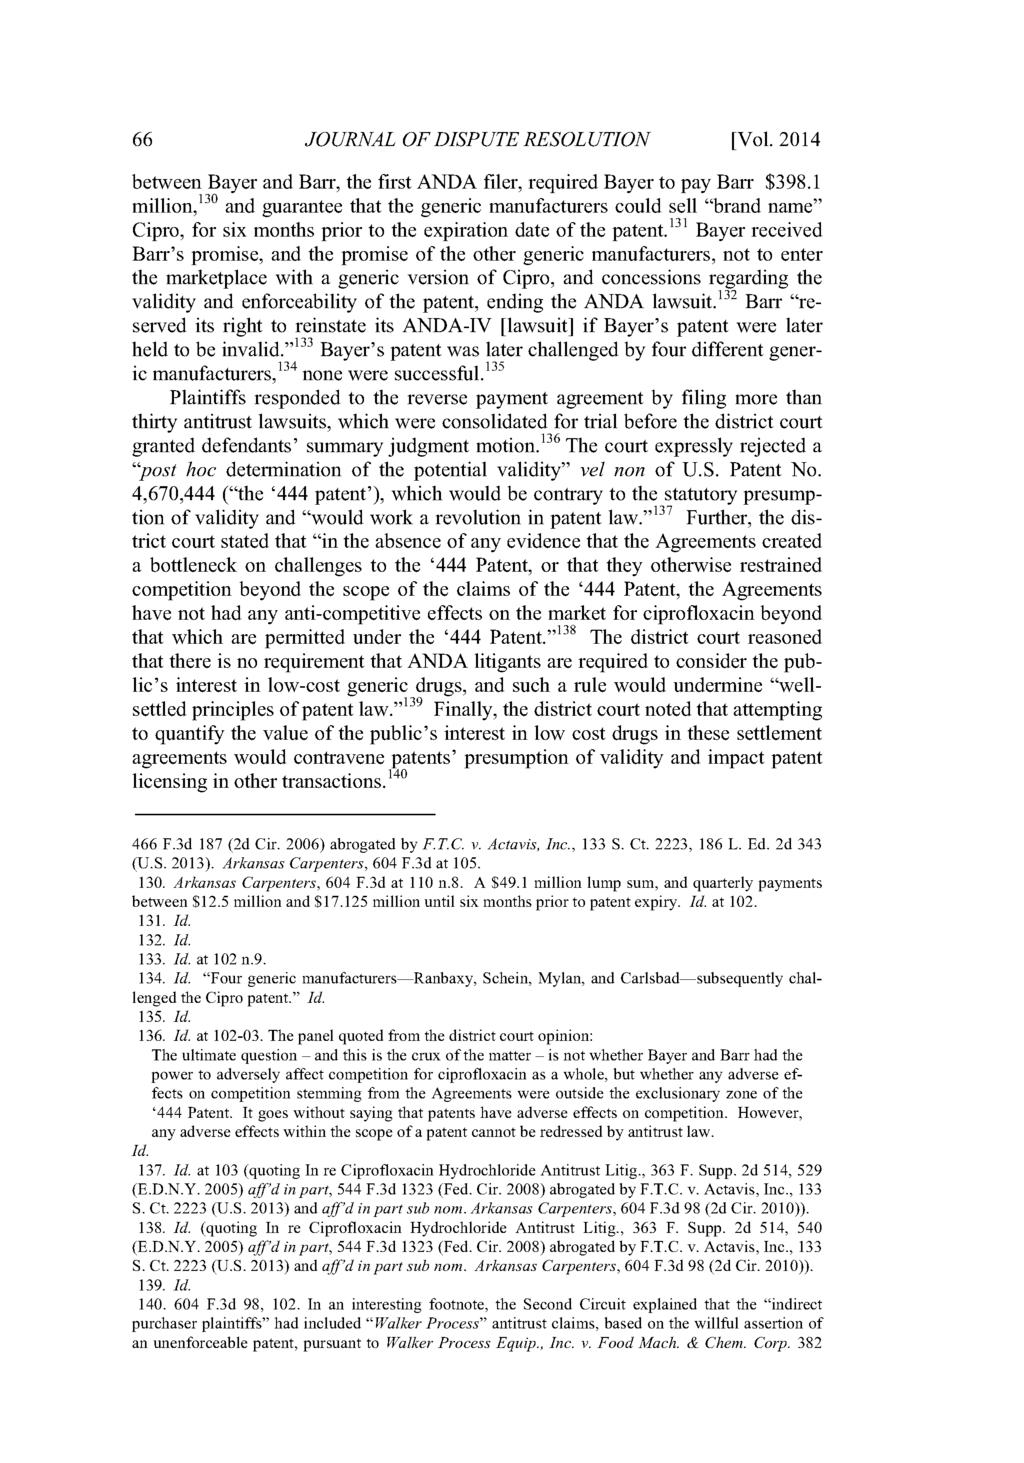 Journal of Dispute Resolution, Vol. 2014, Iss. 1 [2014], Art. 5 66 JOURNAL OF DISPUTE RESOLUTION [Vol. 2014 between Bayer and Barr, the first ANDA filer, required Bayer to pay Barr $398.